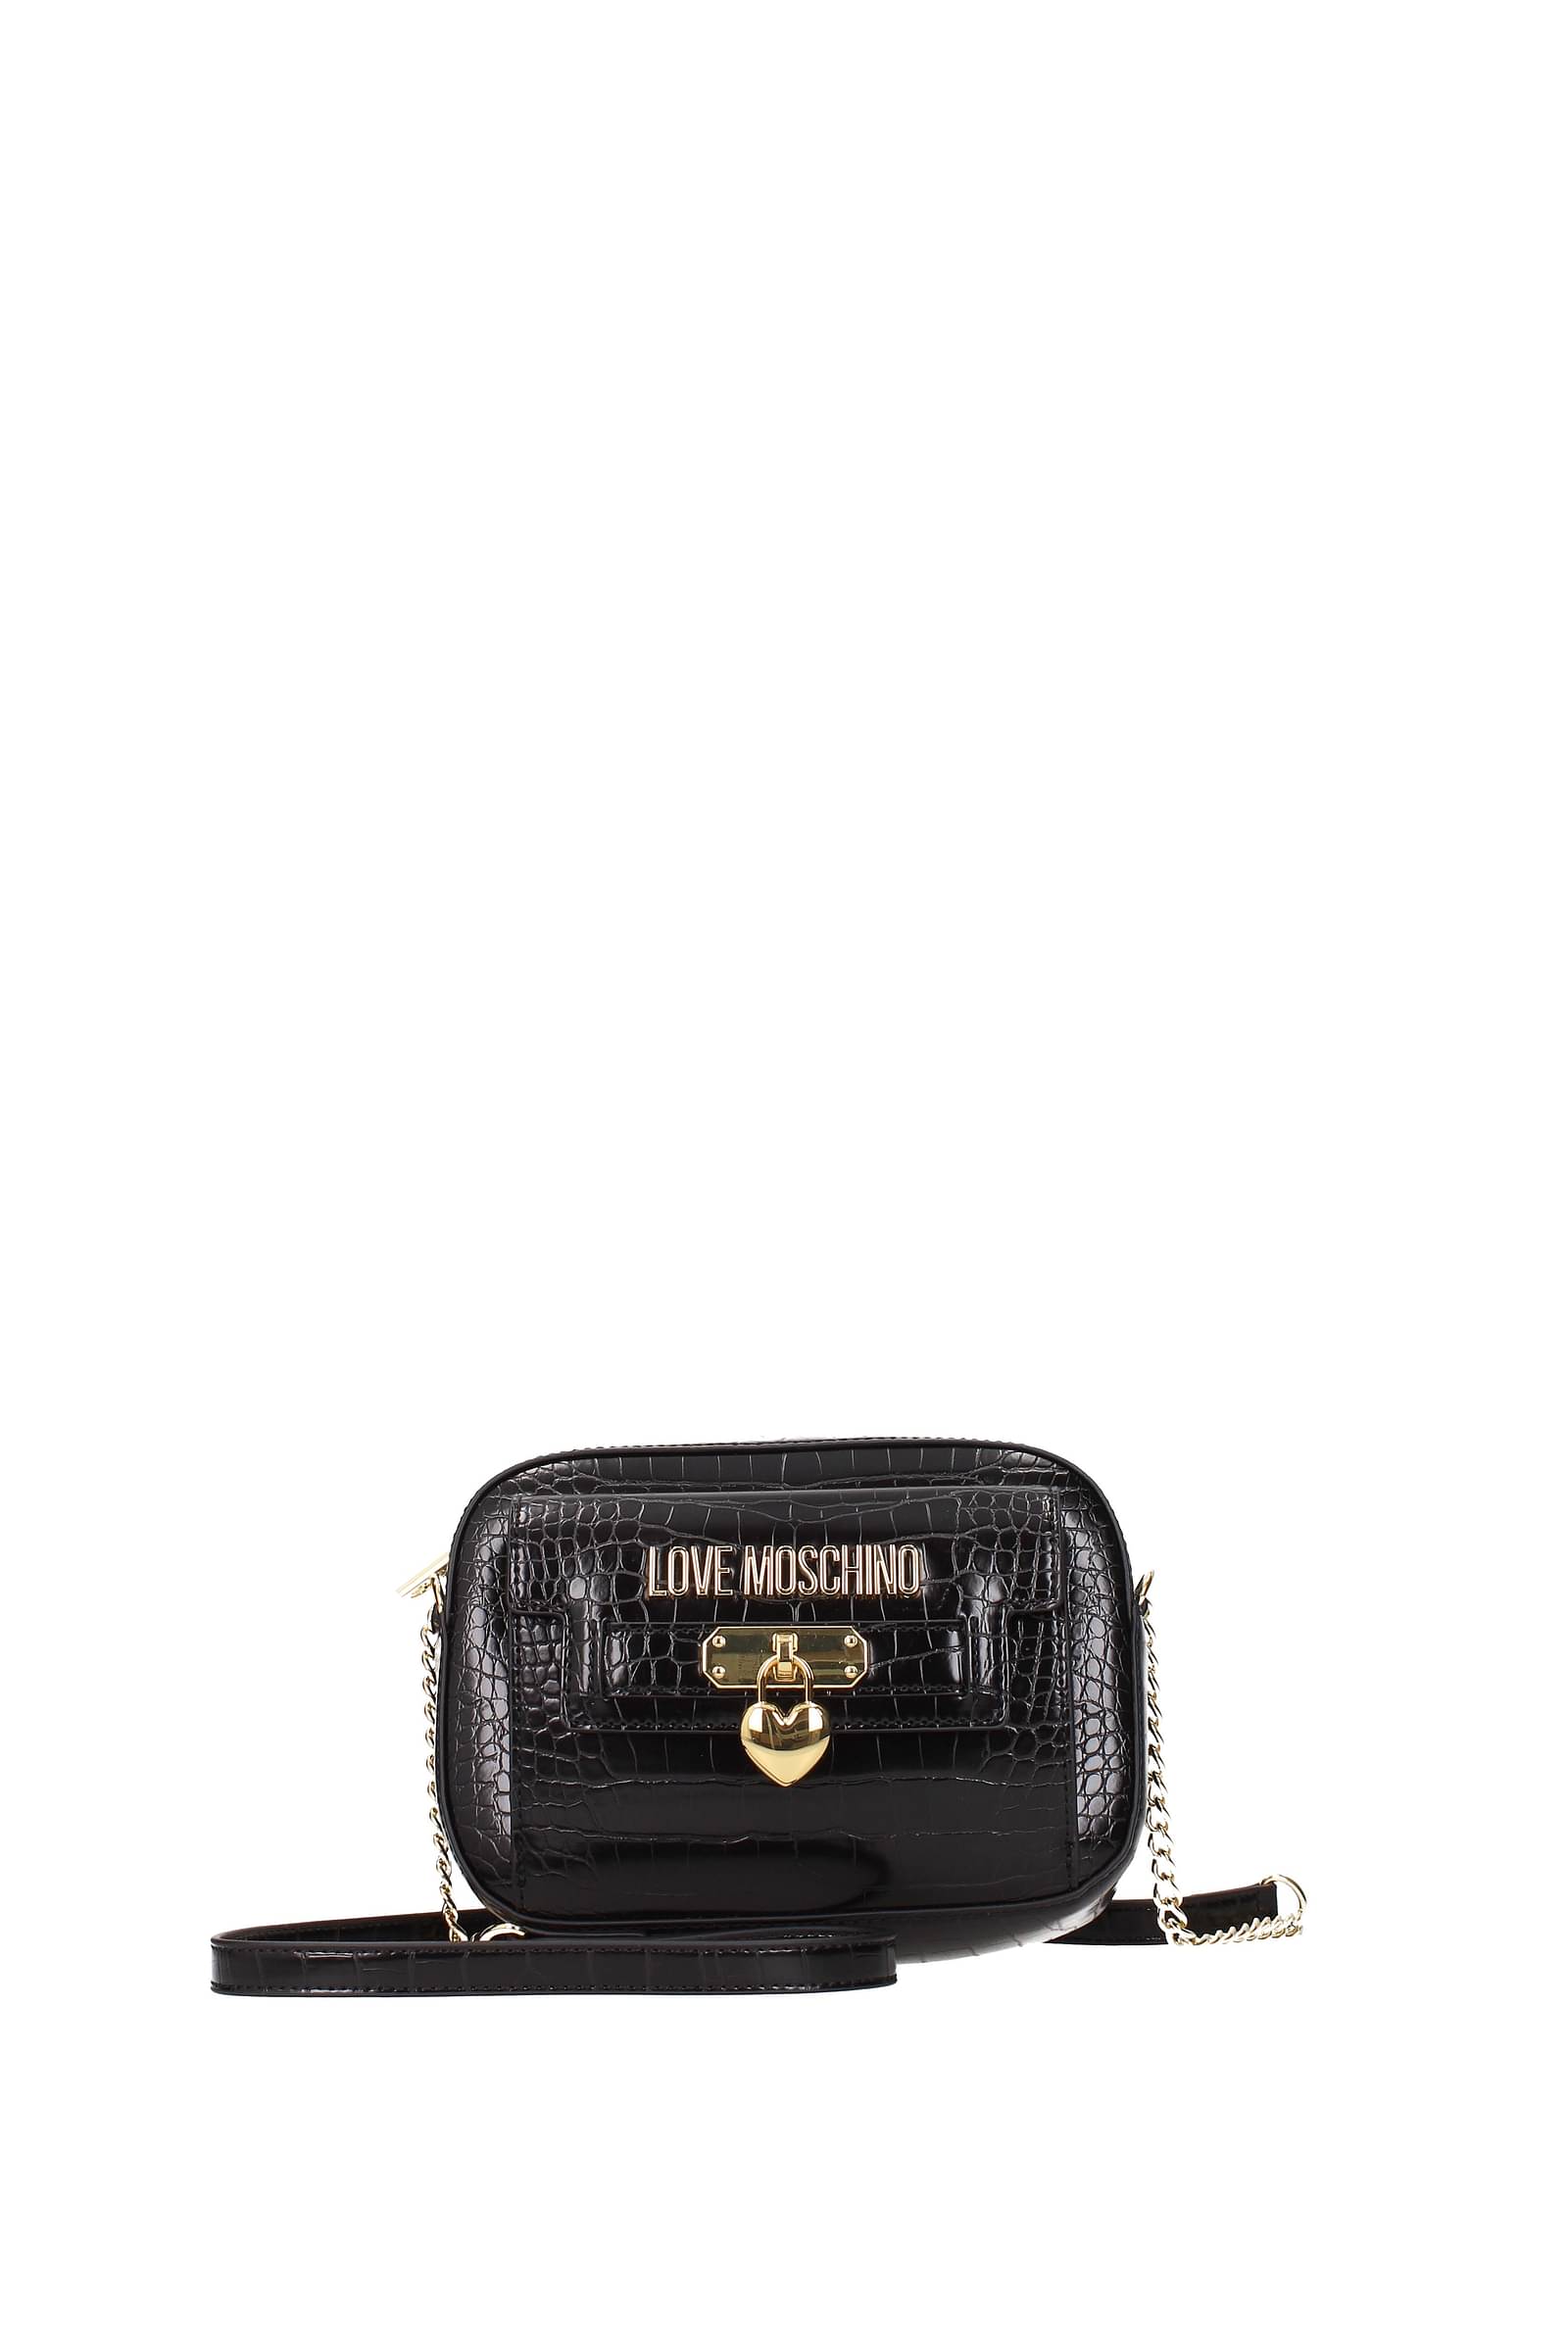 Love Moschino logo-lettering Faux Leather Shoulder Bag - Farfetch